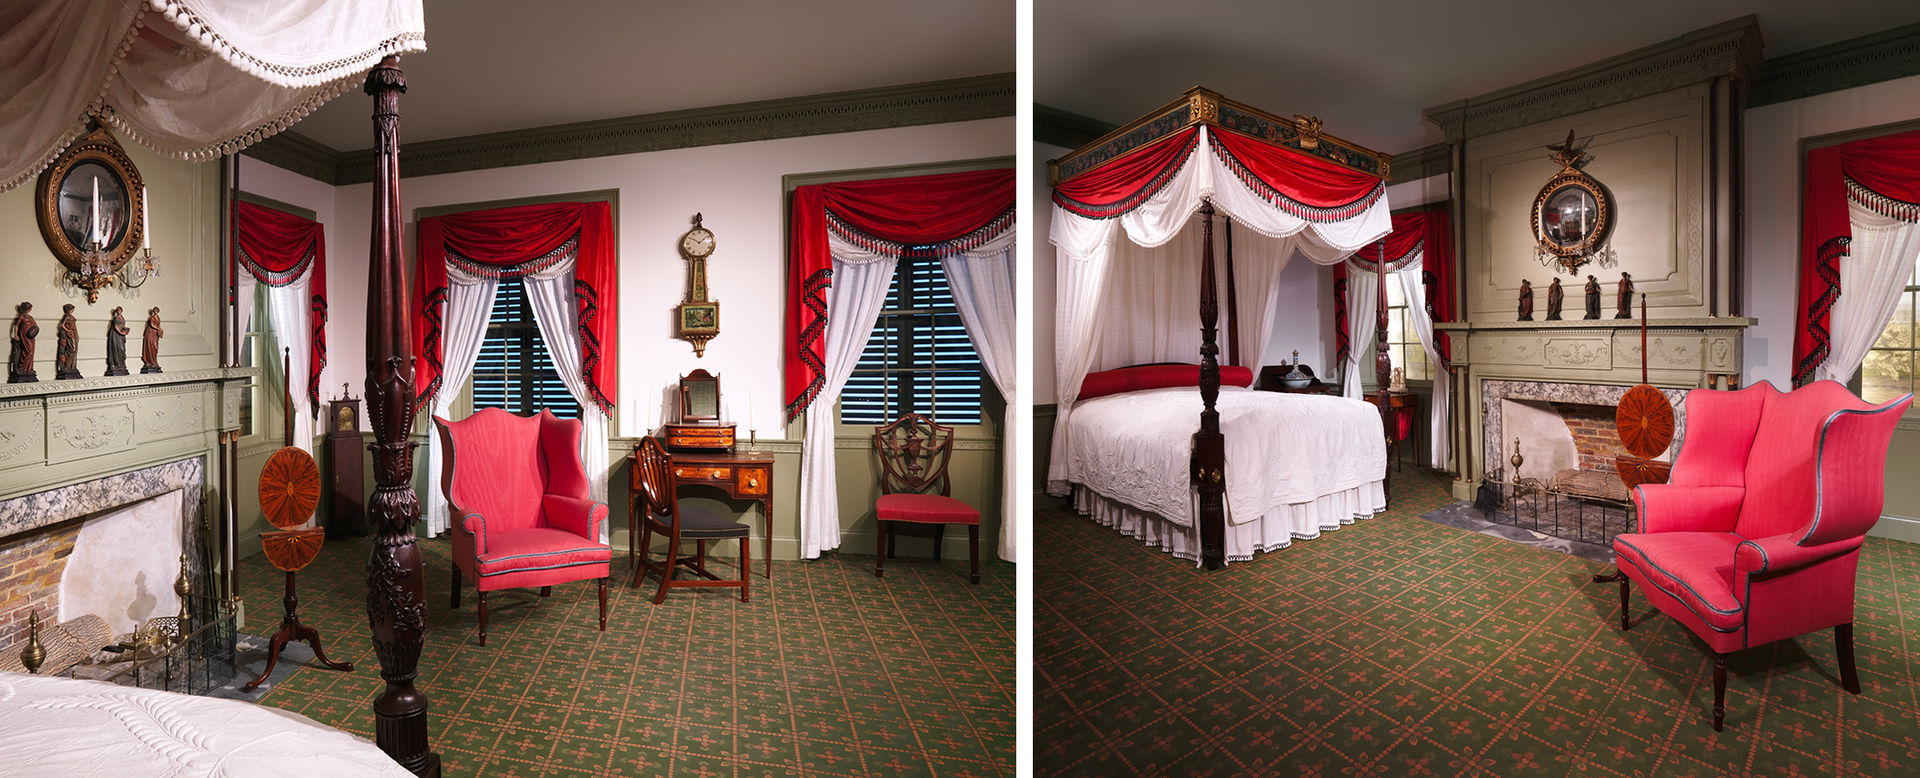 Two views of a former parlor from 1805 decorated as a bedroom with a large red and white canopy bed and a red easy chair